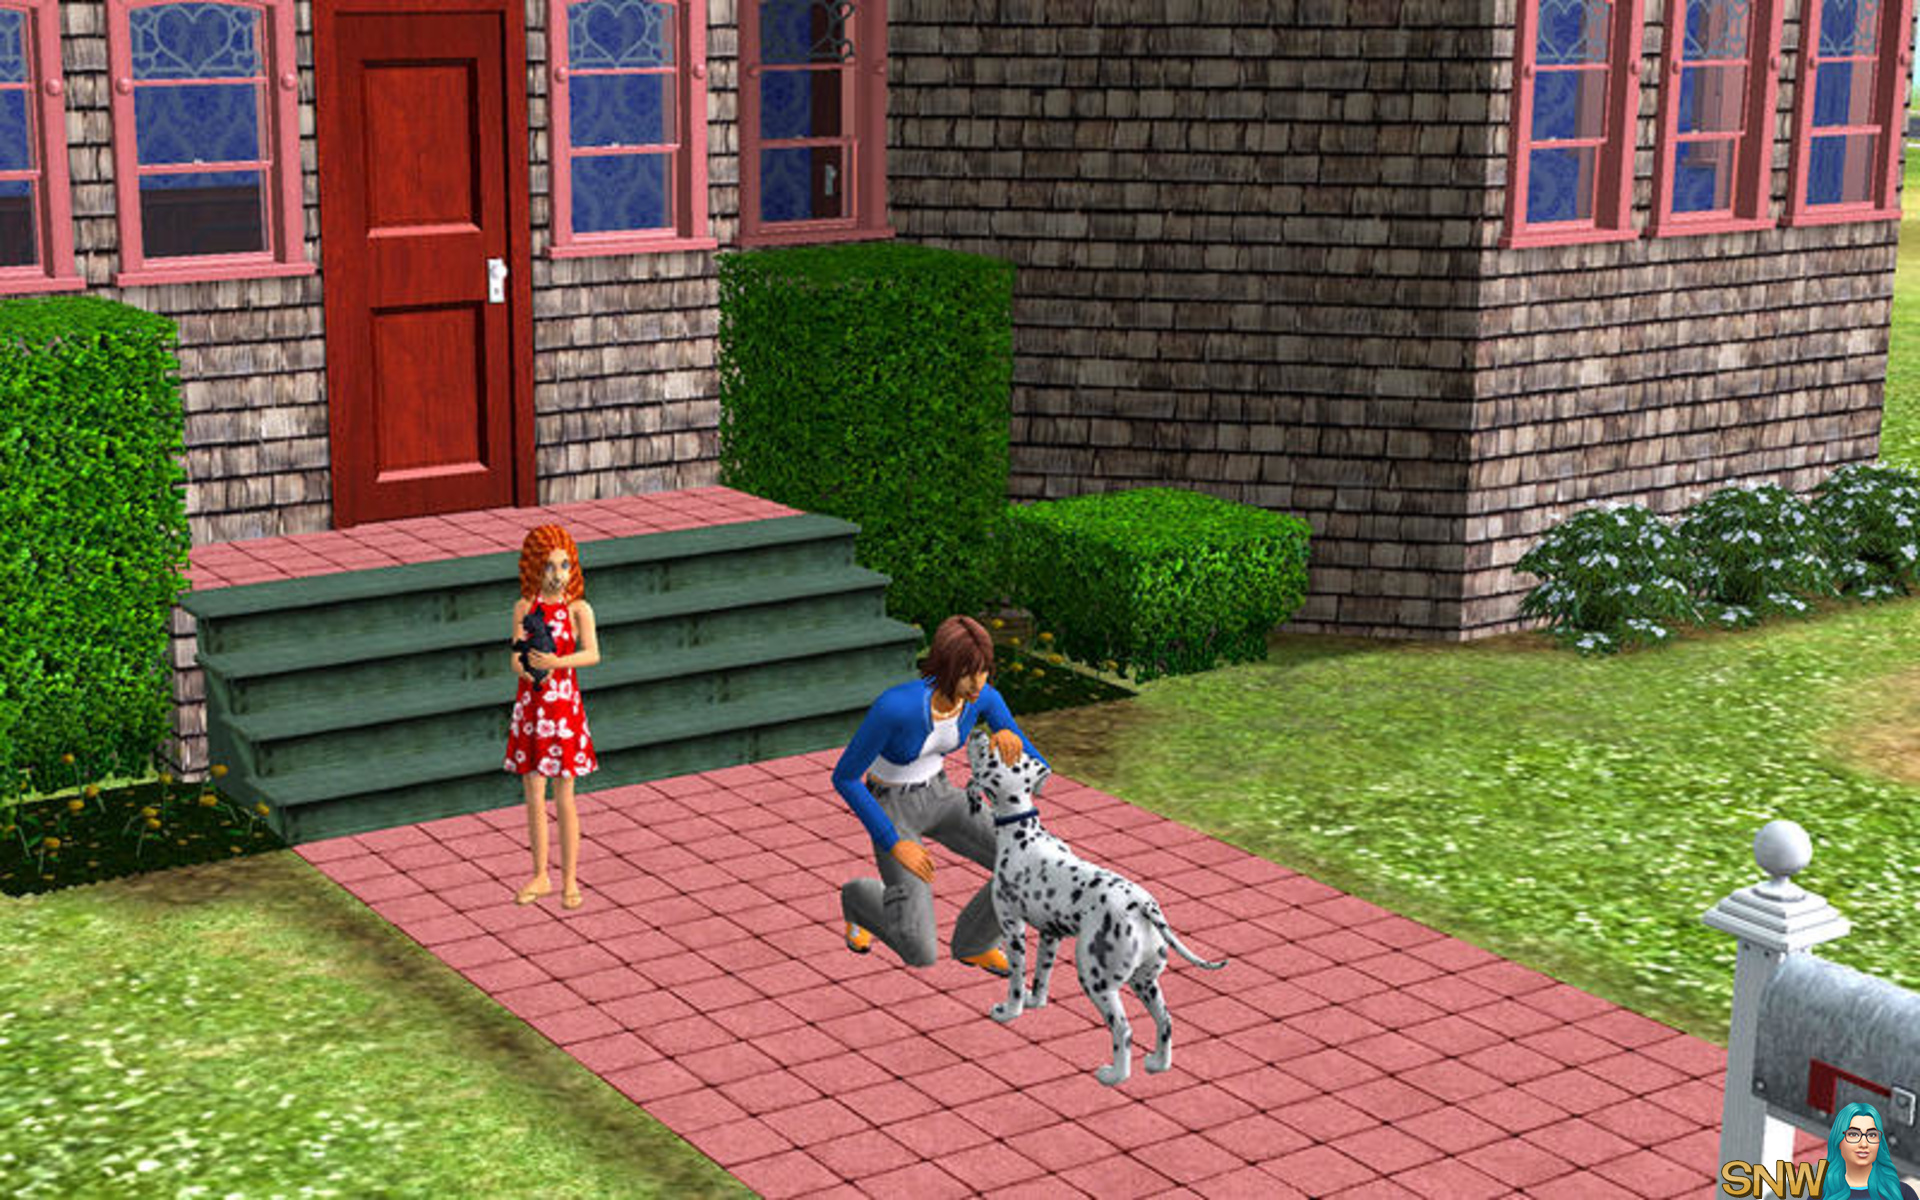 Sims 2 collection. The SIMS 2. SIMS 2 screenshots. Симс 2 Ultimate collection. Симс 2 ультимейт.